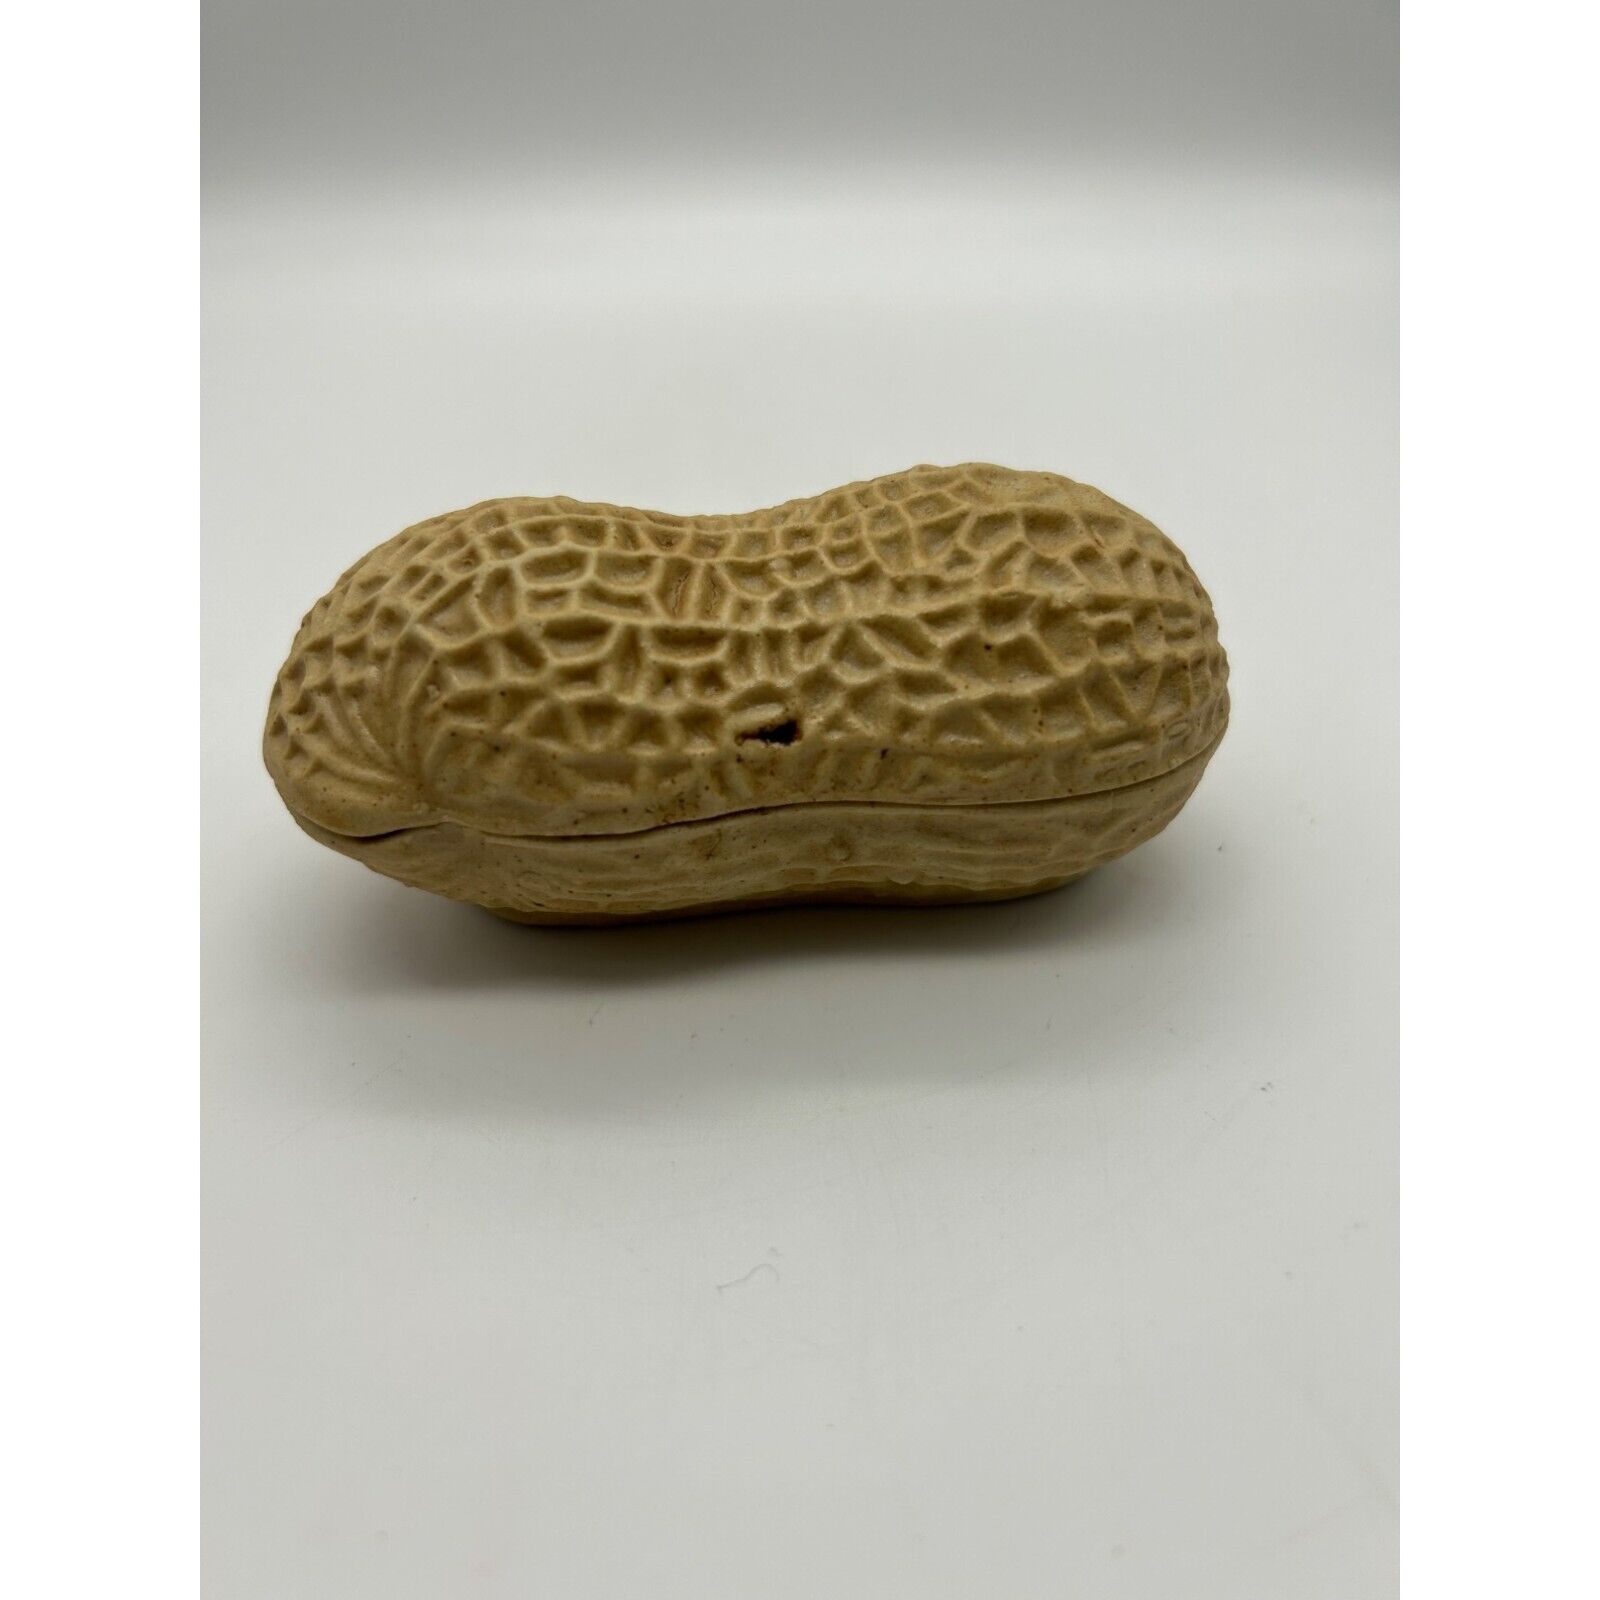 Vintage Chinese Ceramic Peanut Form Box and Cover With Ceramic Peanuts Inside 3.